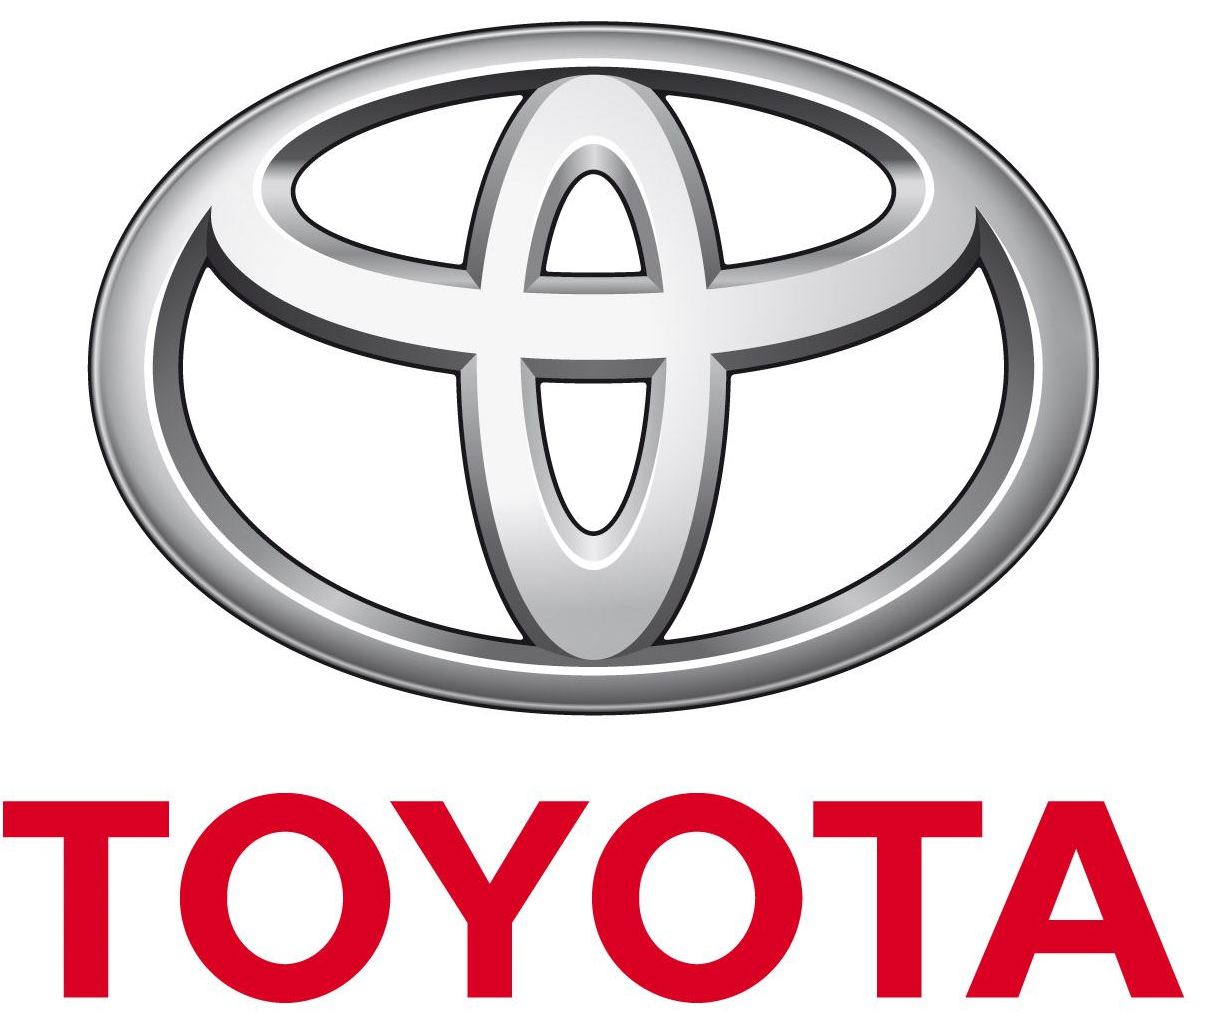 how to draw the toyota logo #2